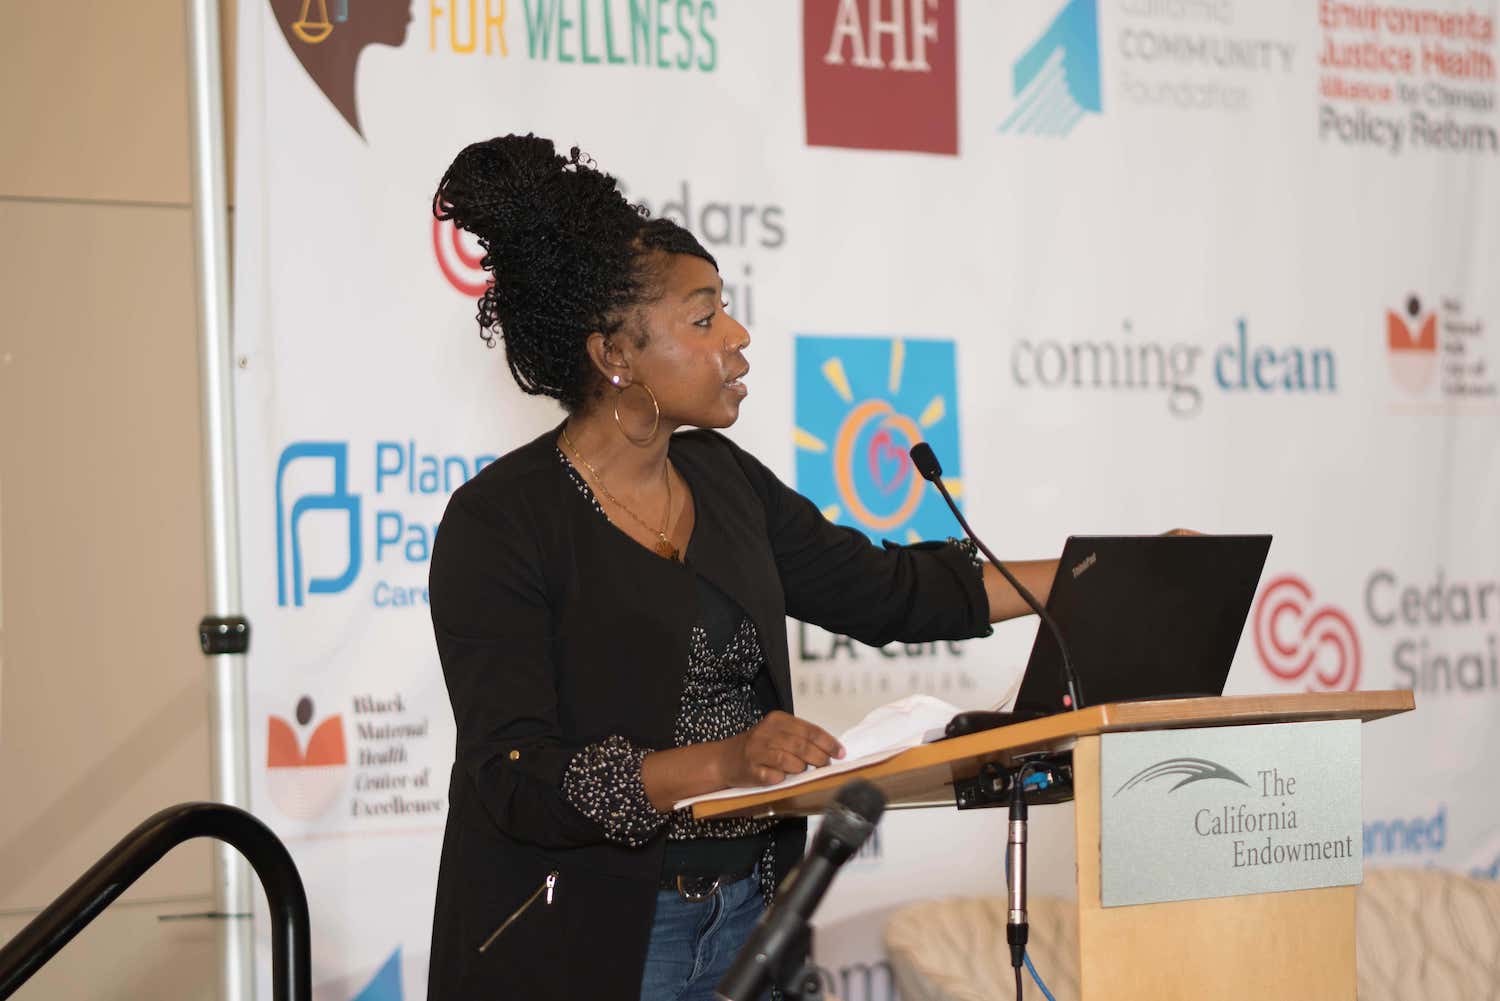 Black Women for Wellness 2023 Reproductive Justice Conference 60